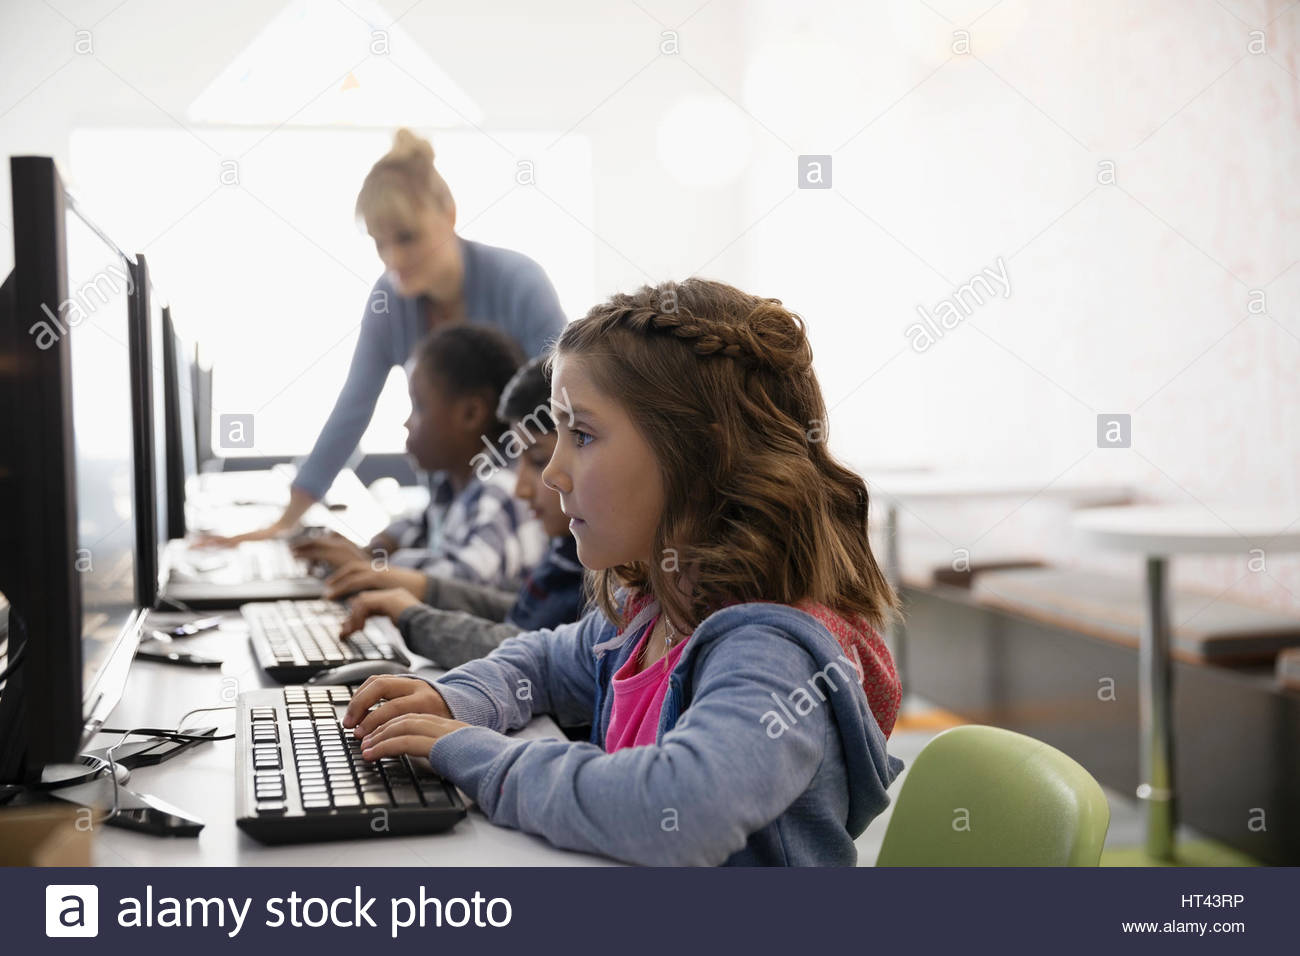 8 year-old girl - Stock Image - C035/1833 - Science Photo Library